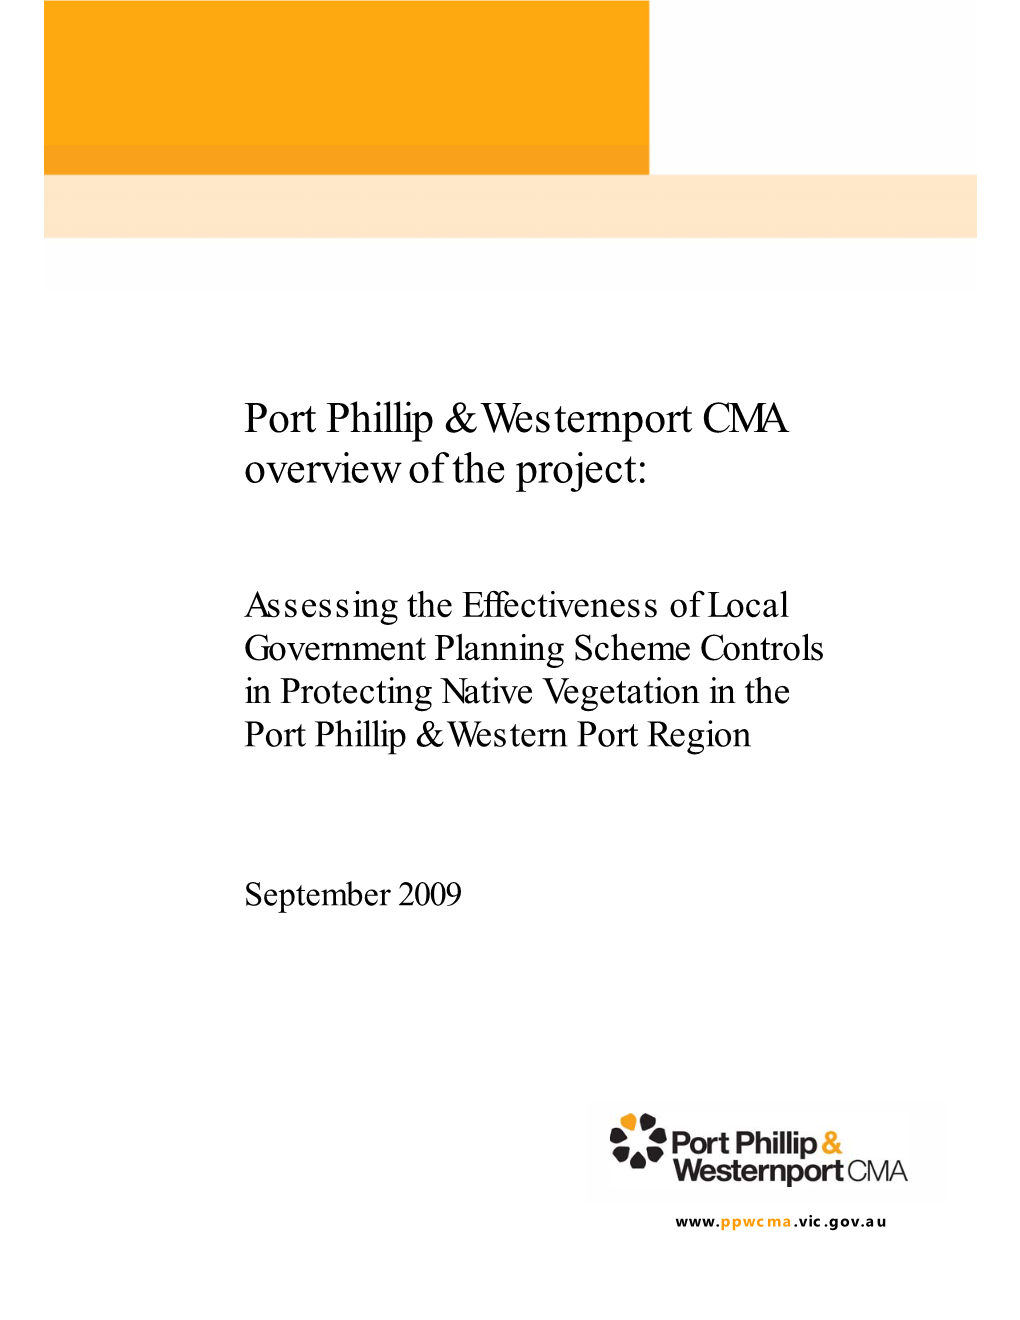 Port Phillip & Westernport CMA Overview of the Project